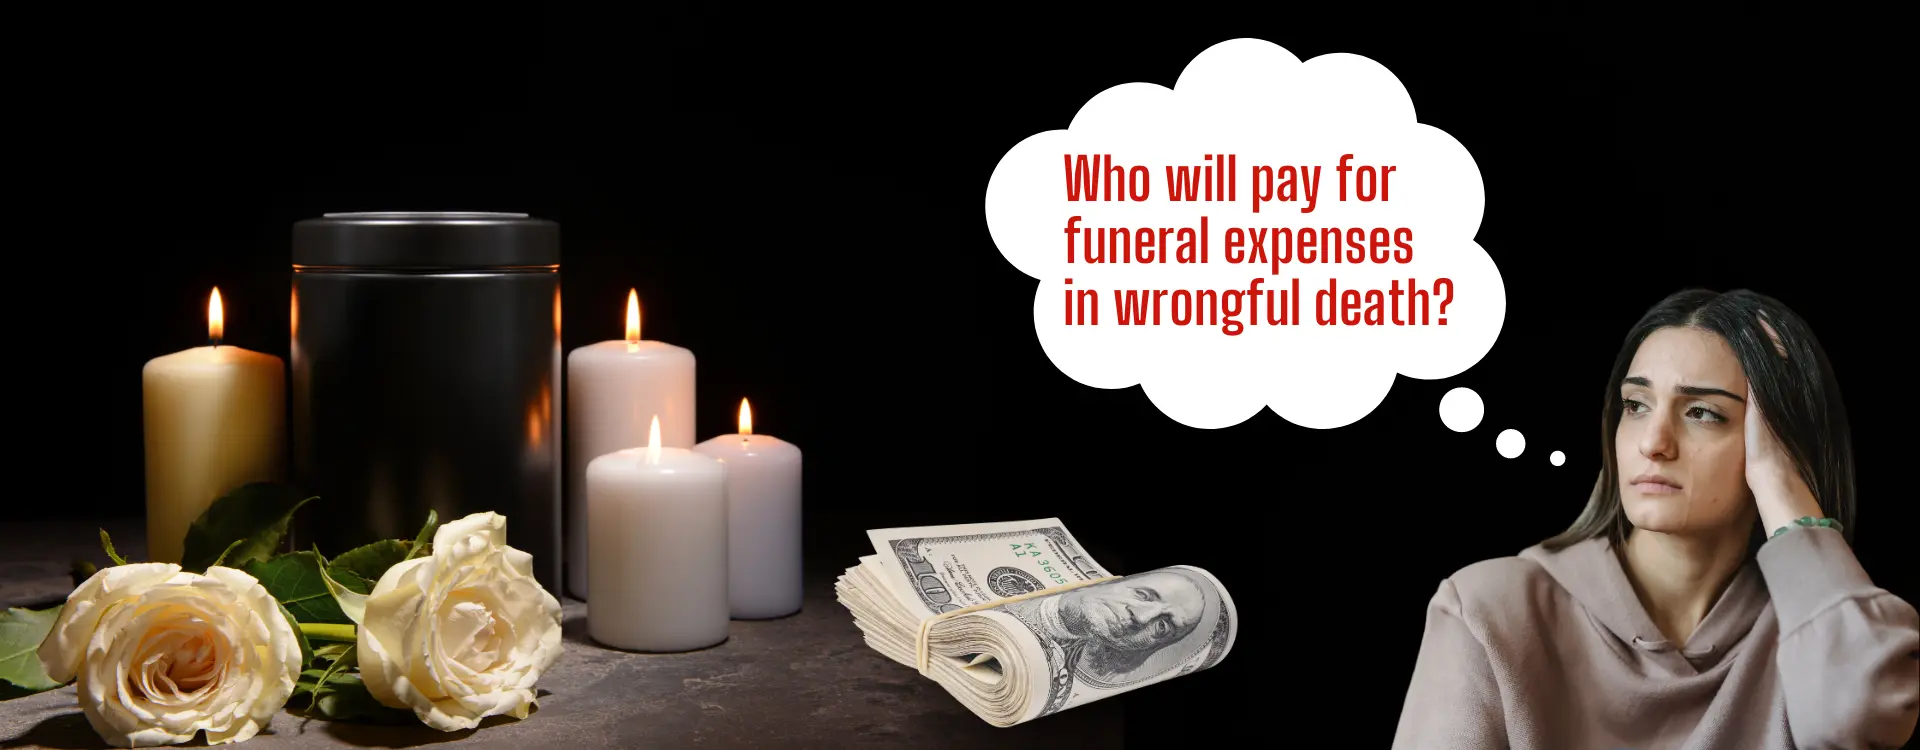 who will pay for funeral expenses in wrongful death